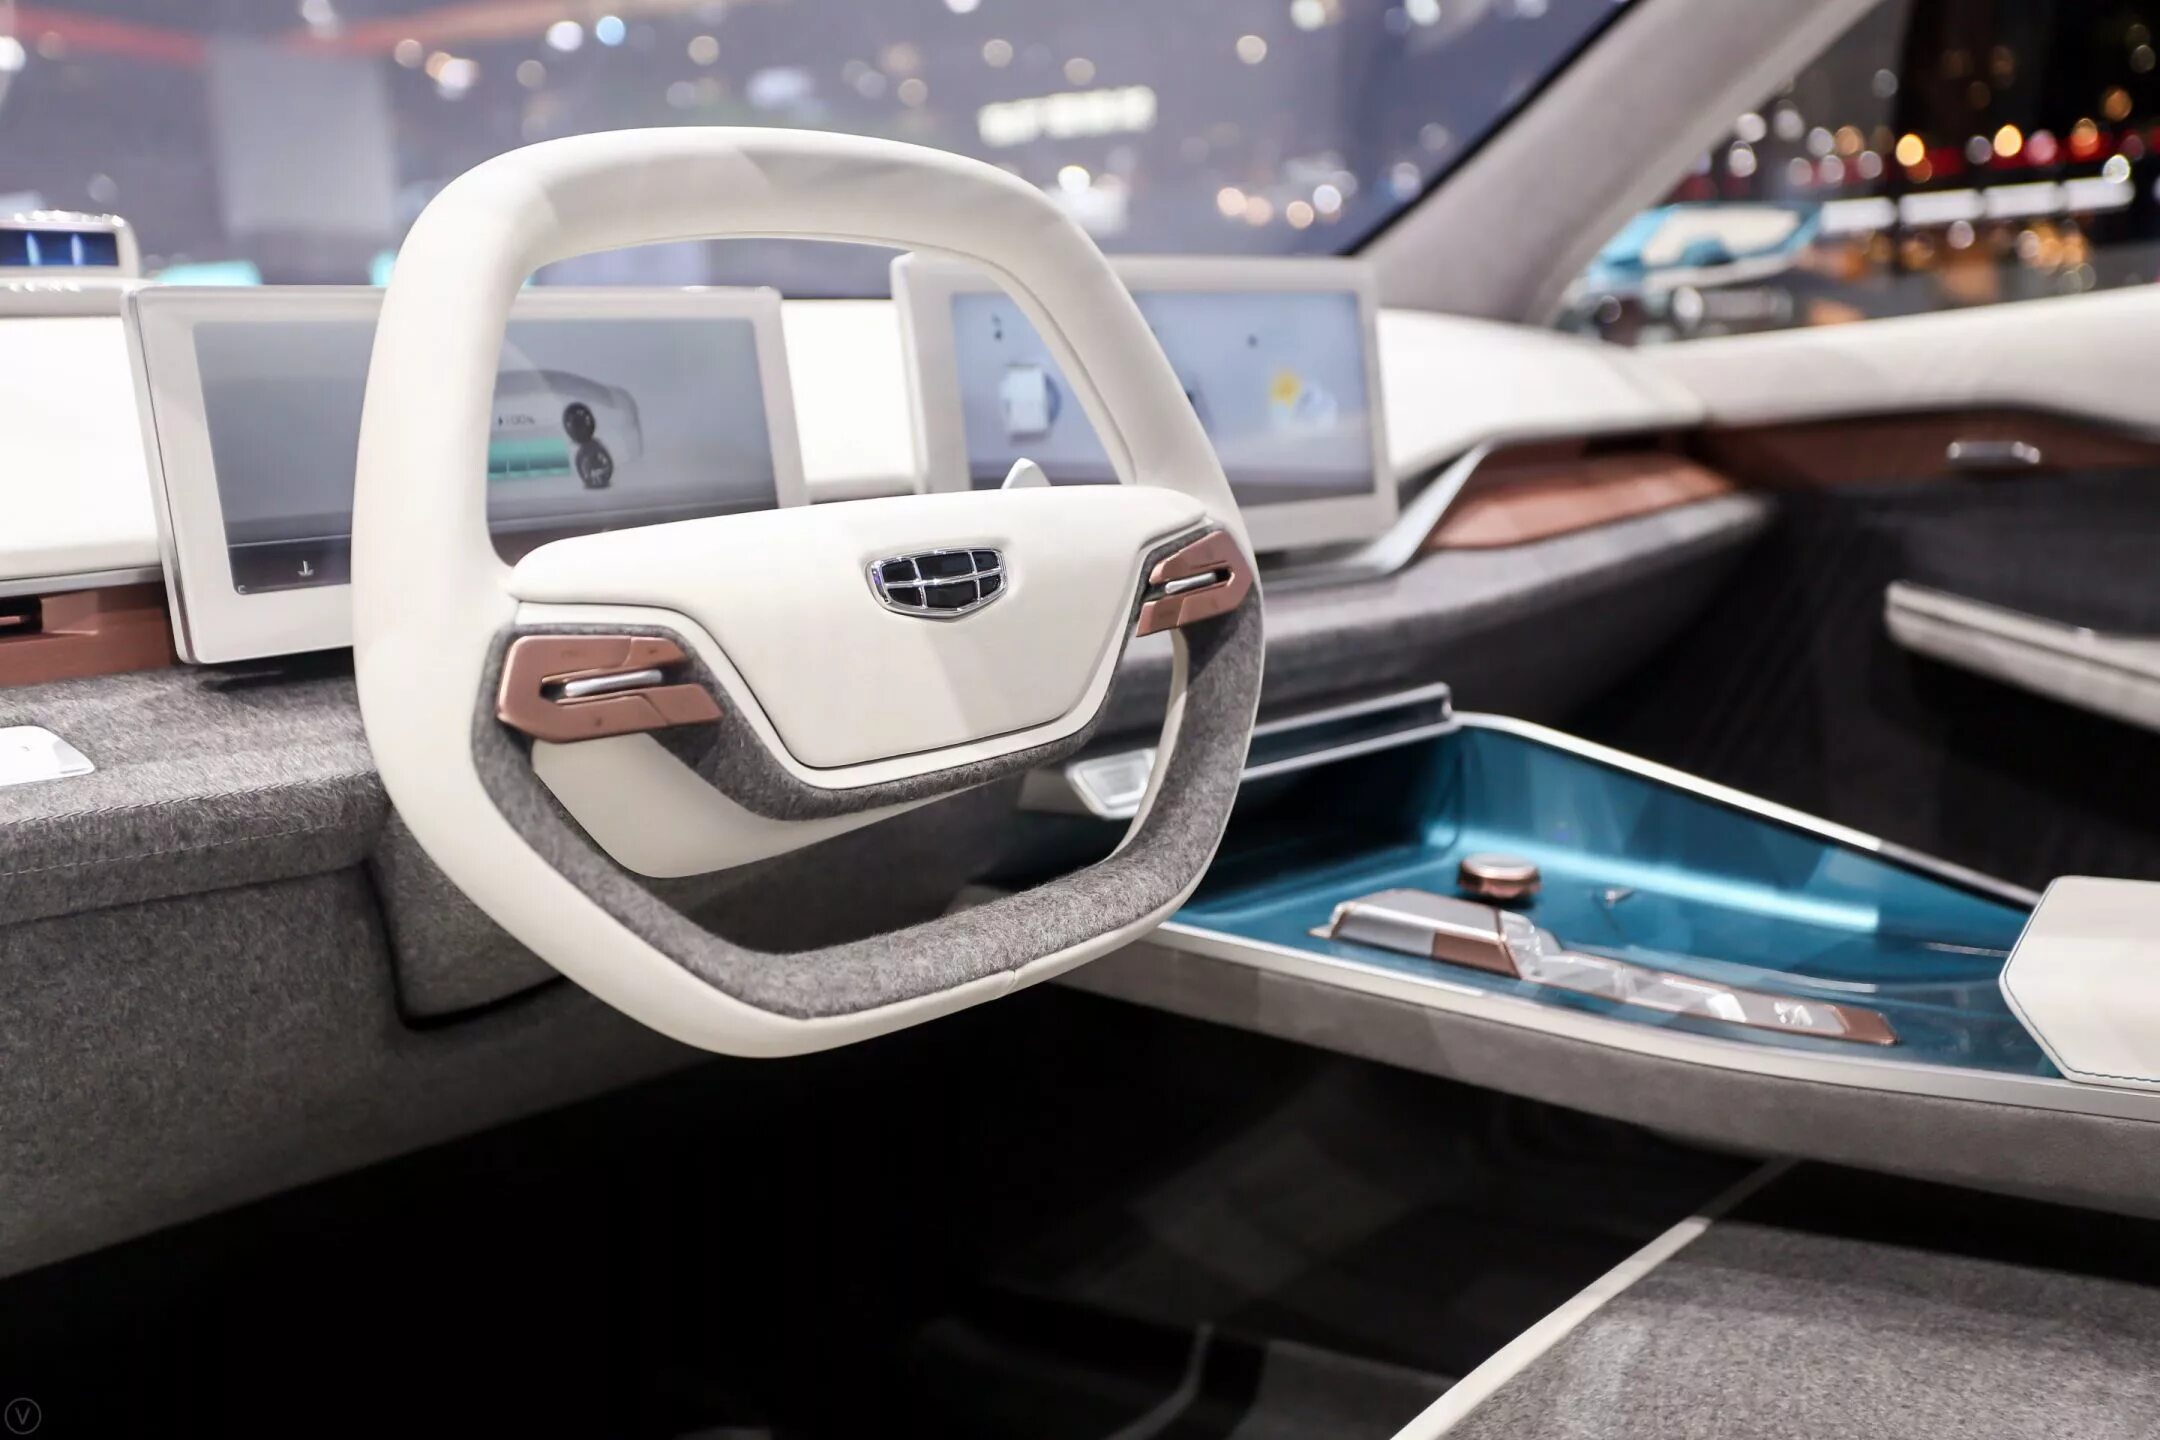 Geely Preface 2020 салон. Geely Preface 2022. Седан Geely Preface. Geely Preface 2023.